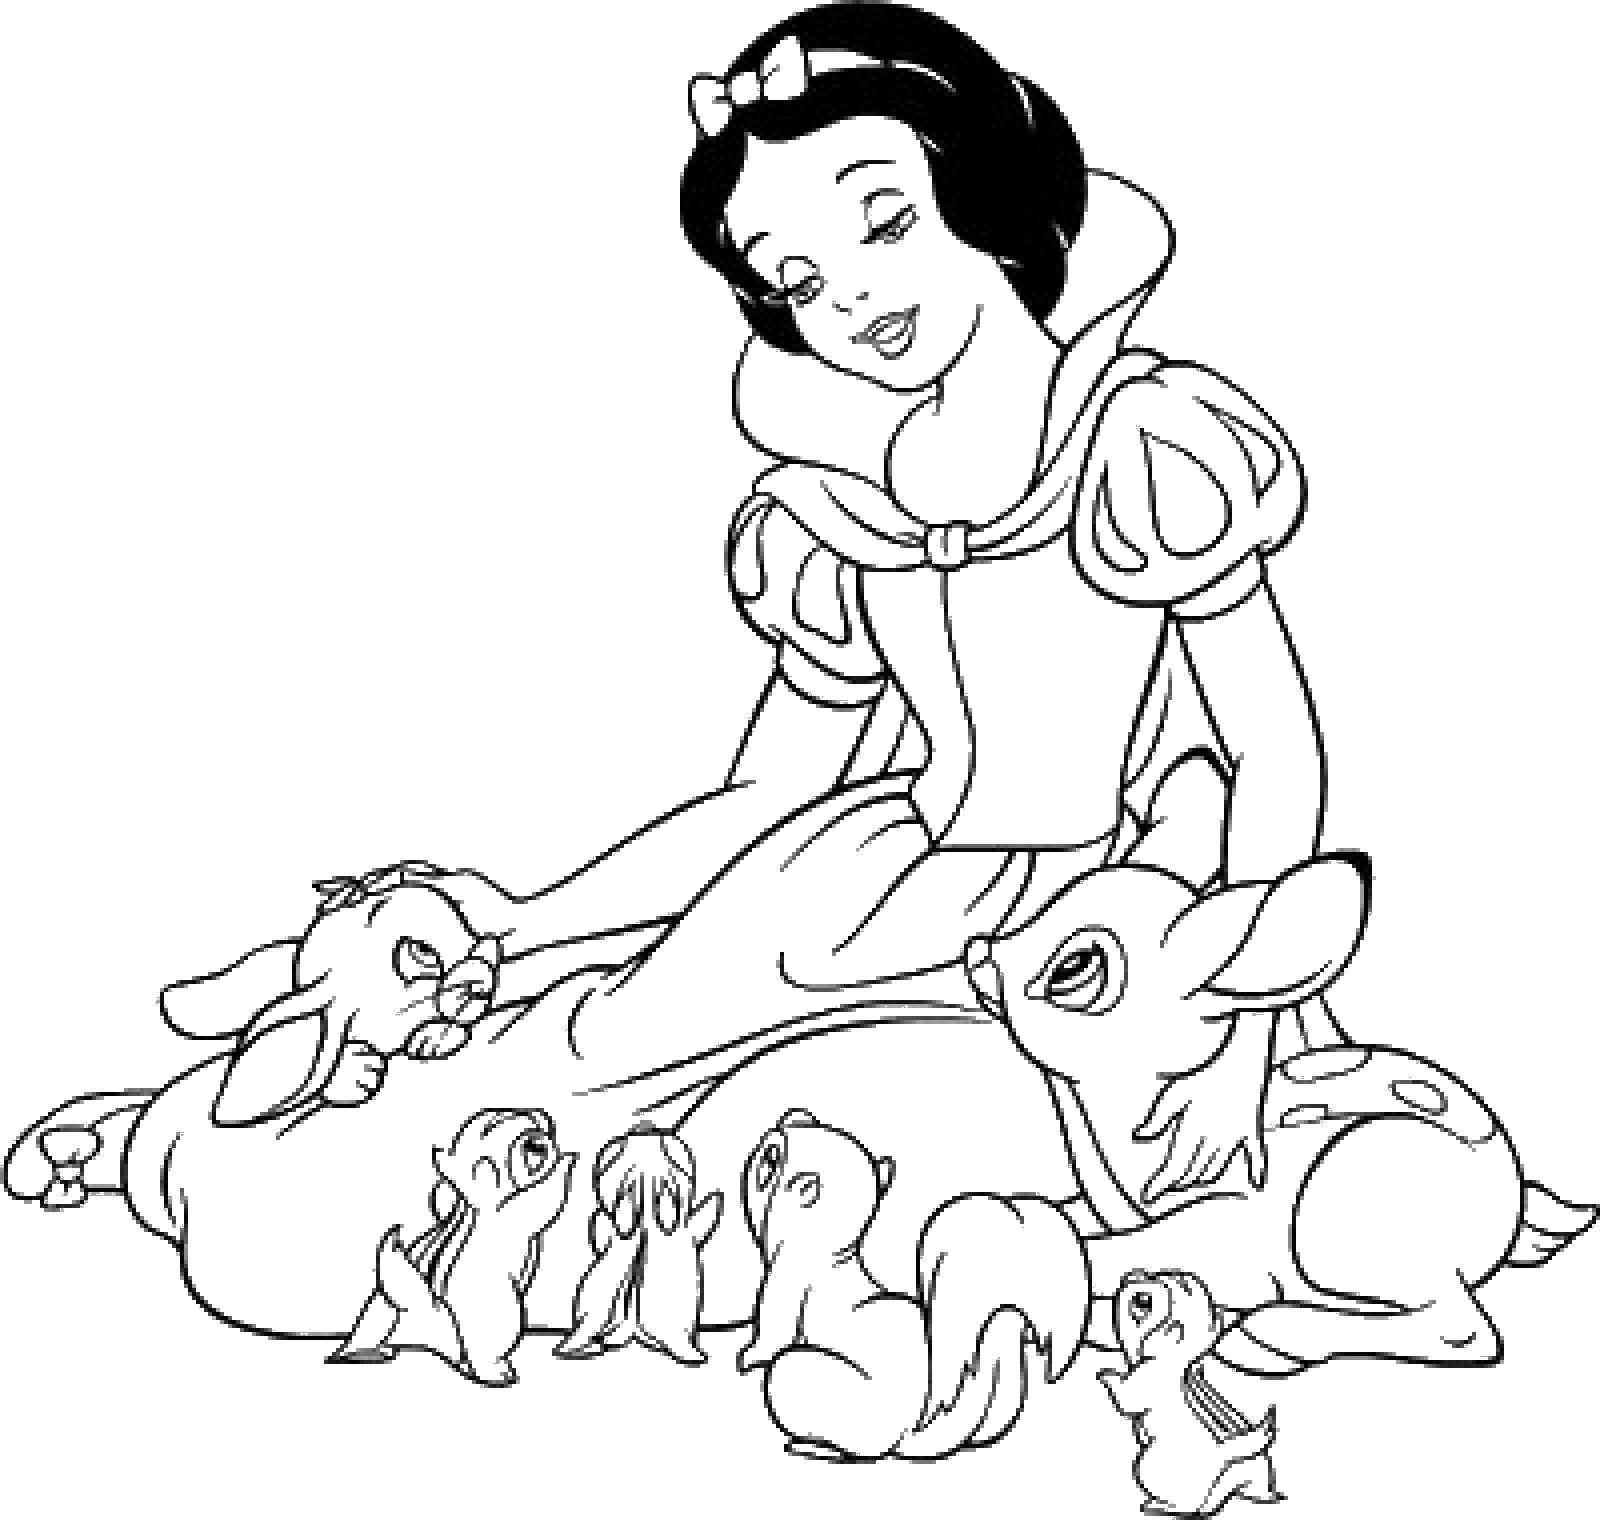 Coloring Snow white petting the animals. Category snow white. Tags:  princesses, cartoons, fairy tales, Snow white.